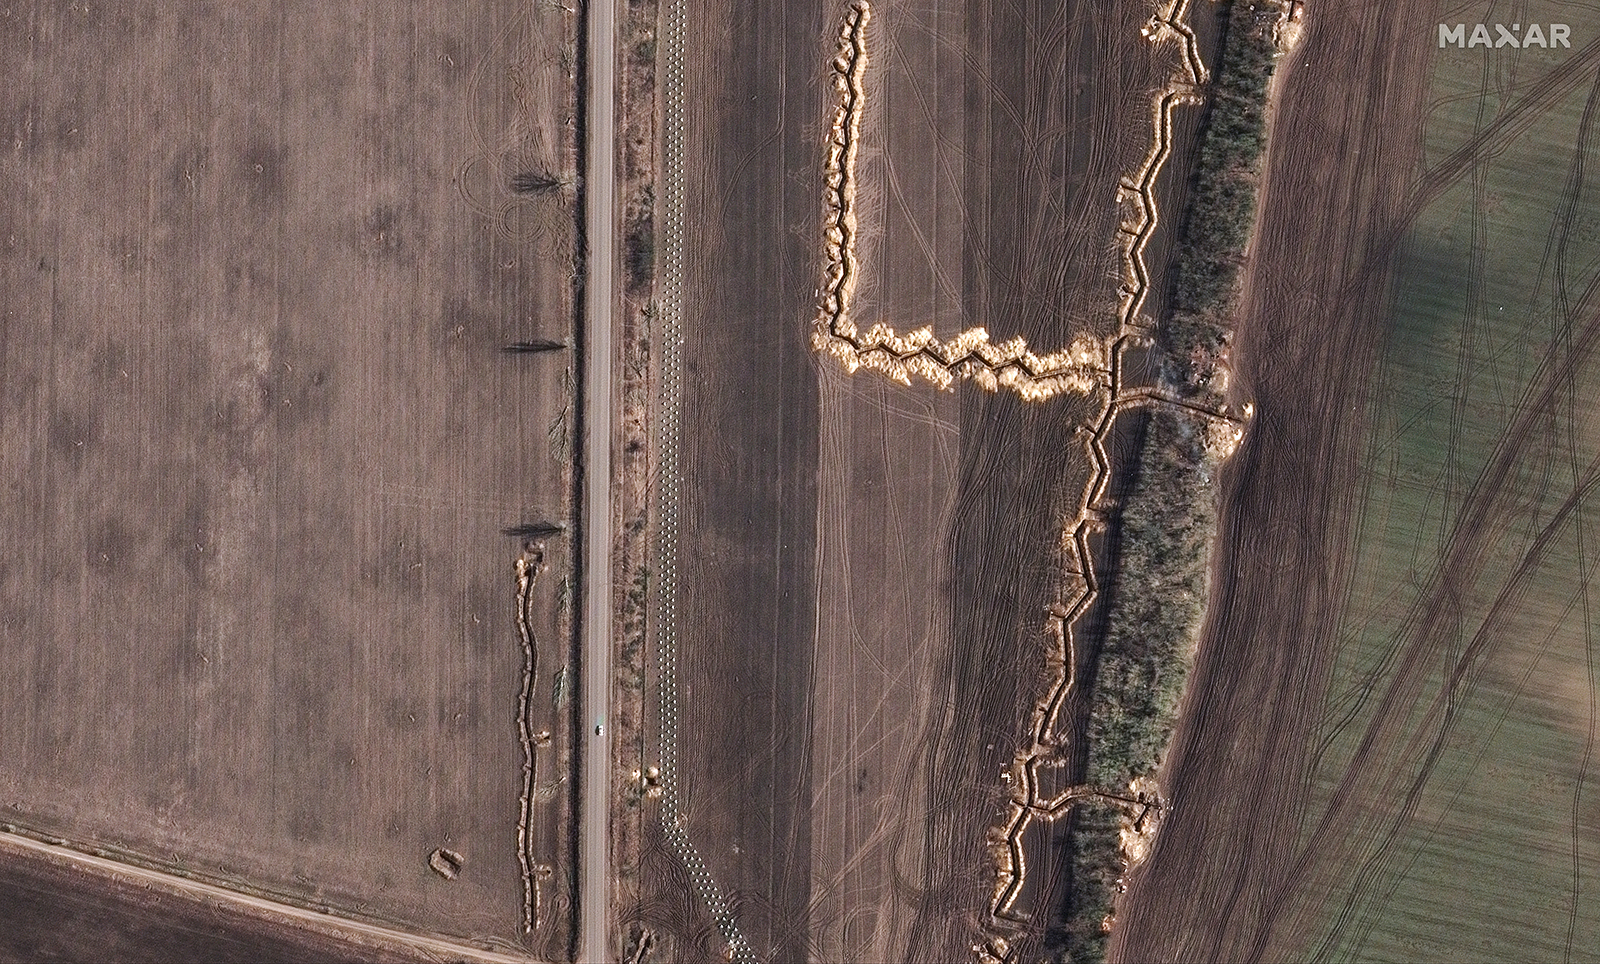 Three rows of dragon's teeth and trenches, east of Vasylivka, Zaporozhzhia, on March 4.